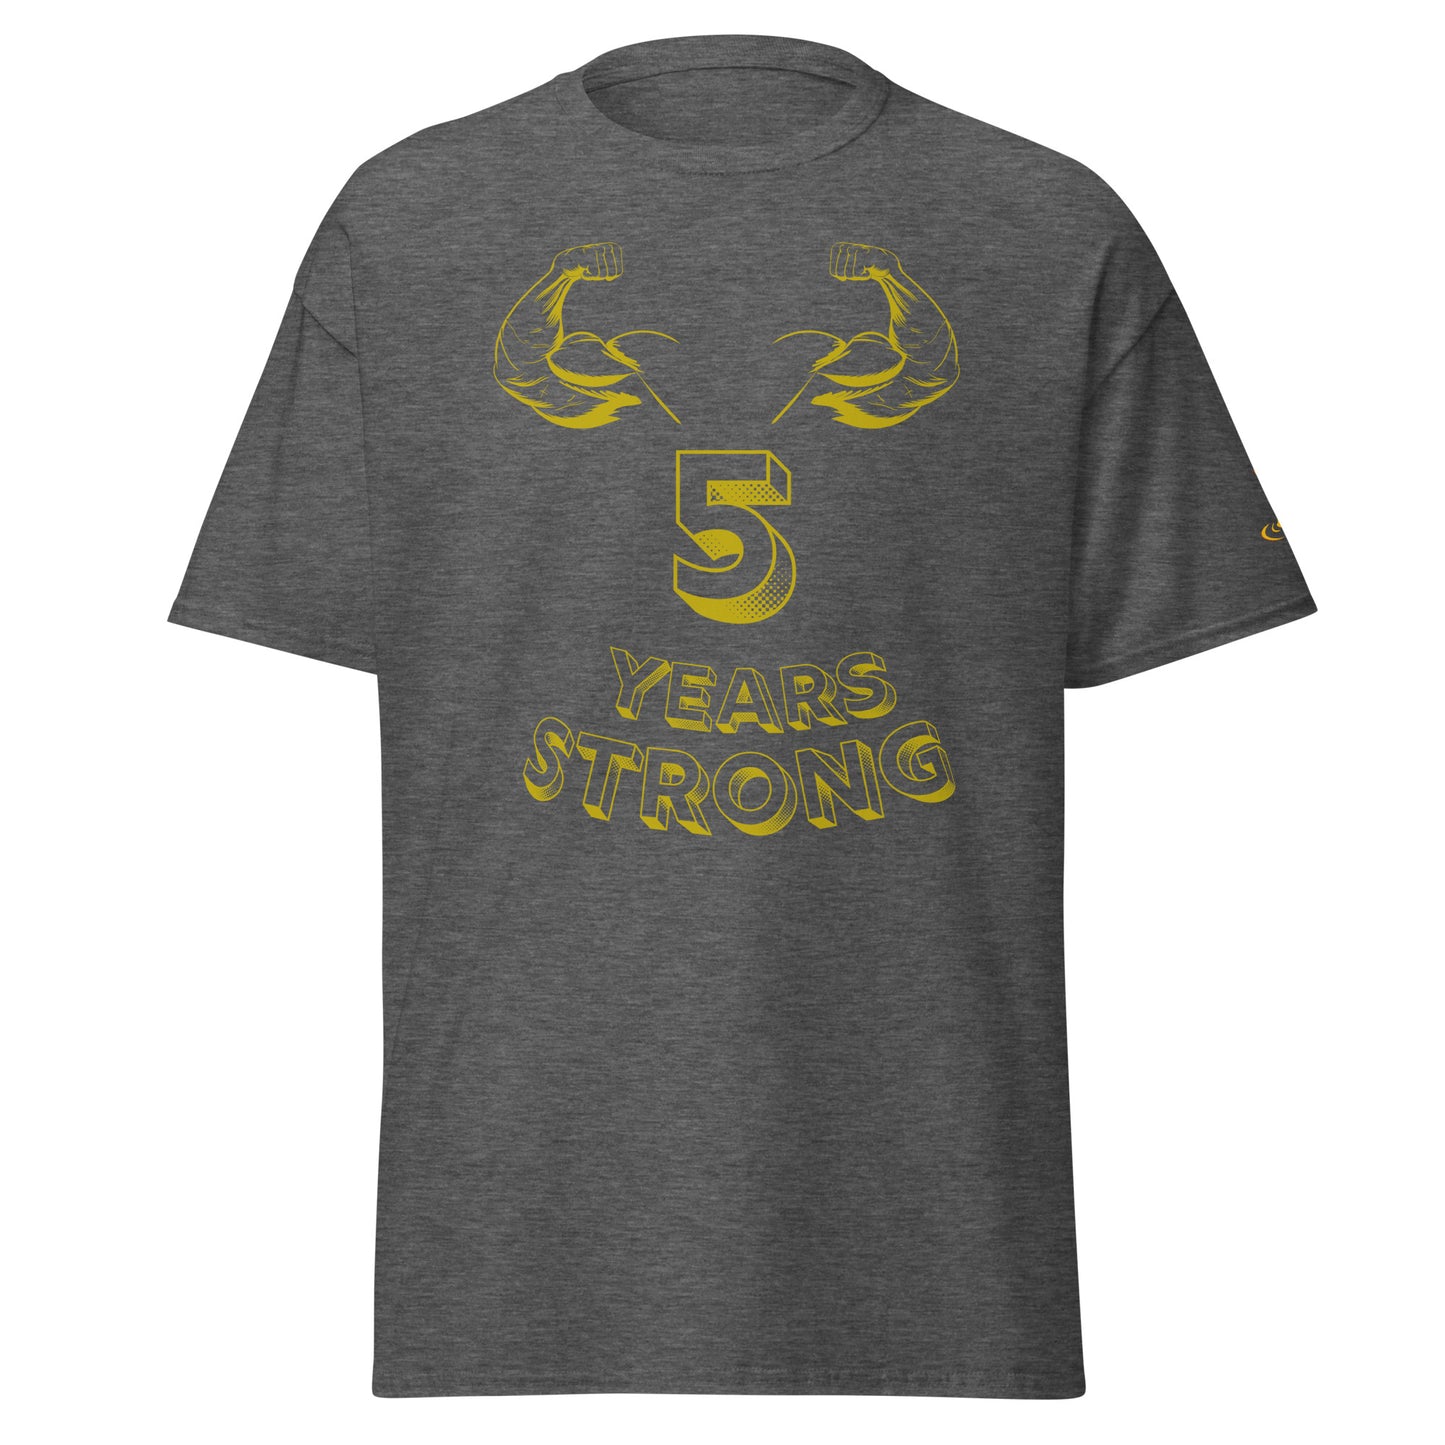 Men's classic tee 5 Years Strong